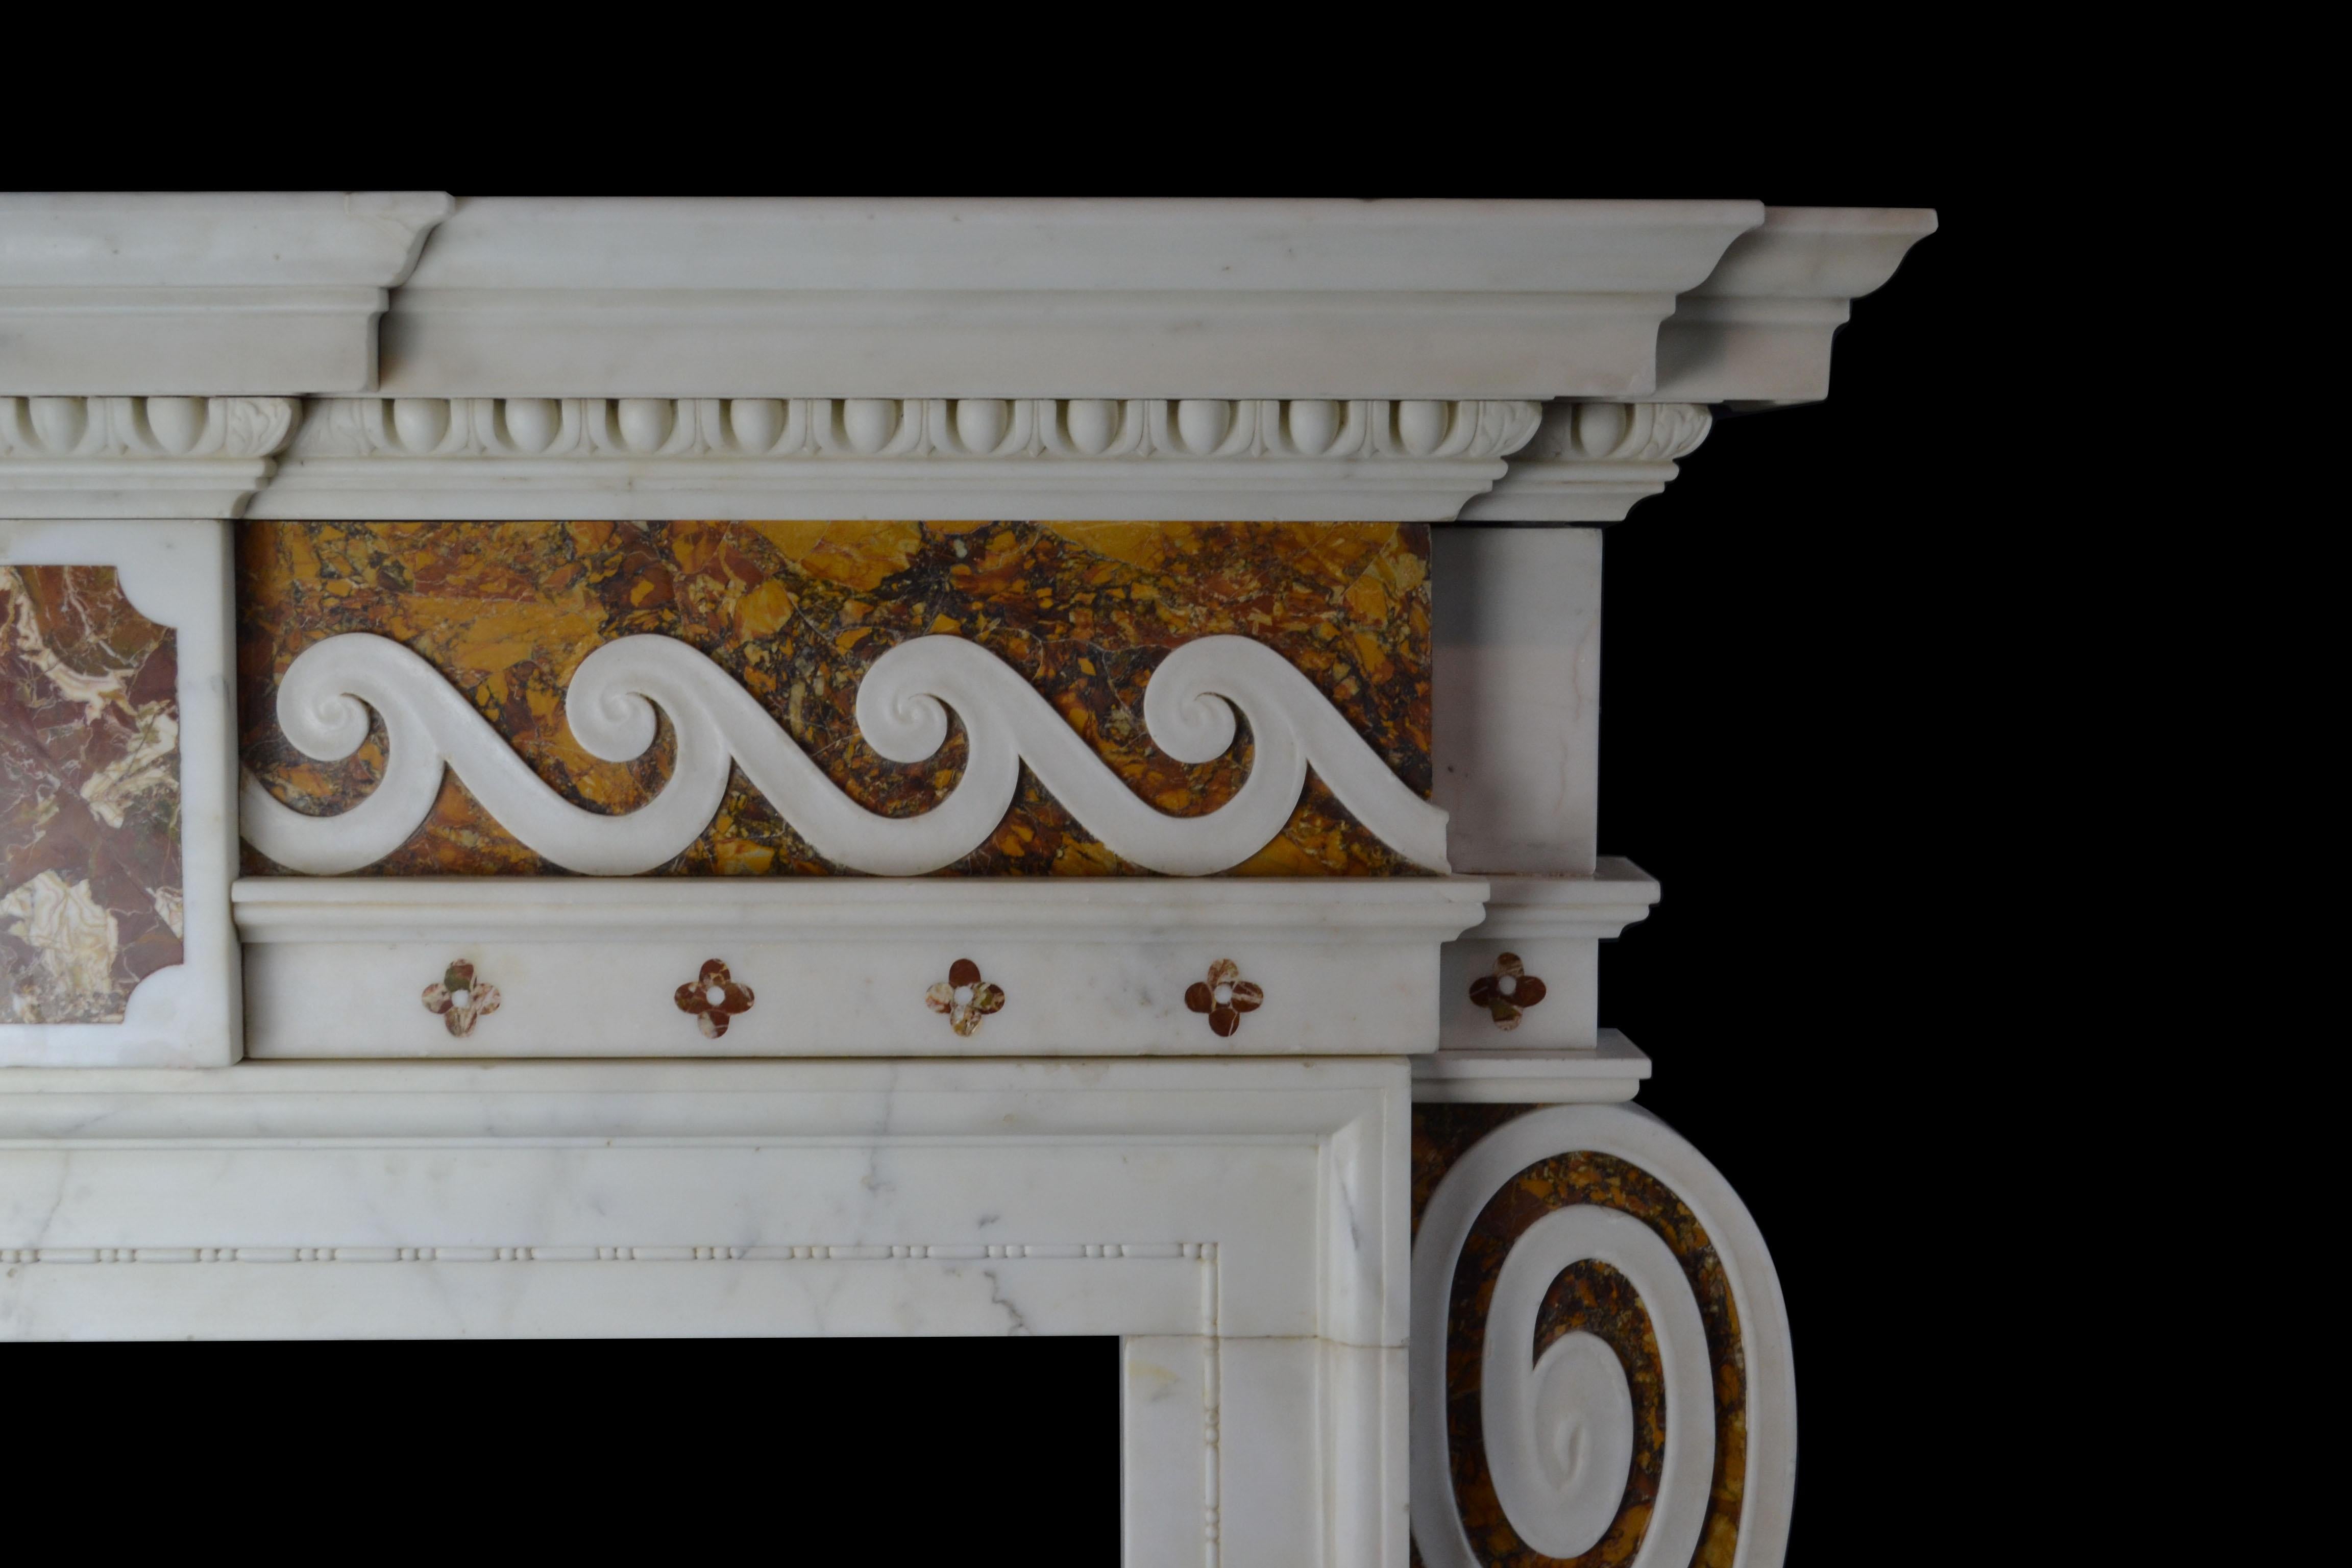 An important mid-18th century English chimneypiece of strong architectural form, with many hallmarks of the work of Sir Henry Cheere. In Statuary, Convent Siena and Sicilian Jasper marbles, with side facing consoles to the jambs, abutting inground